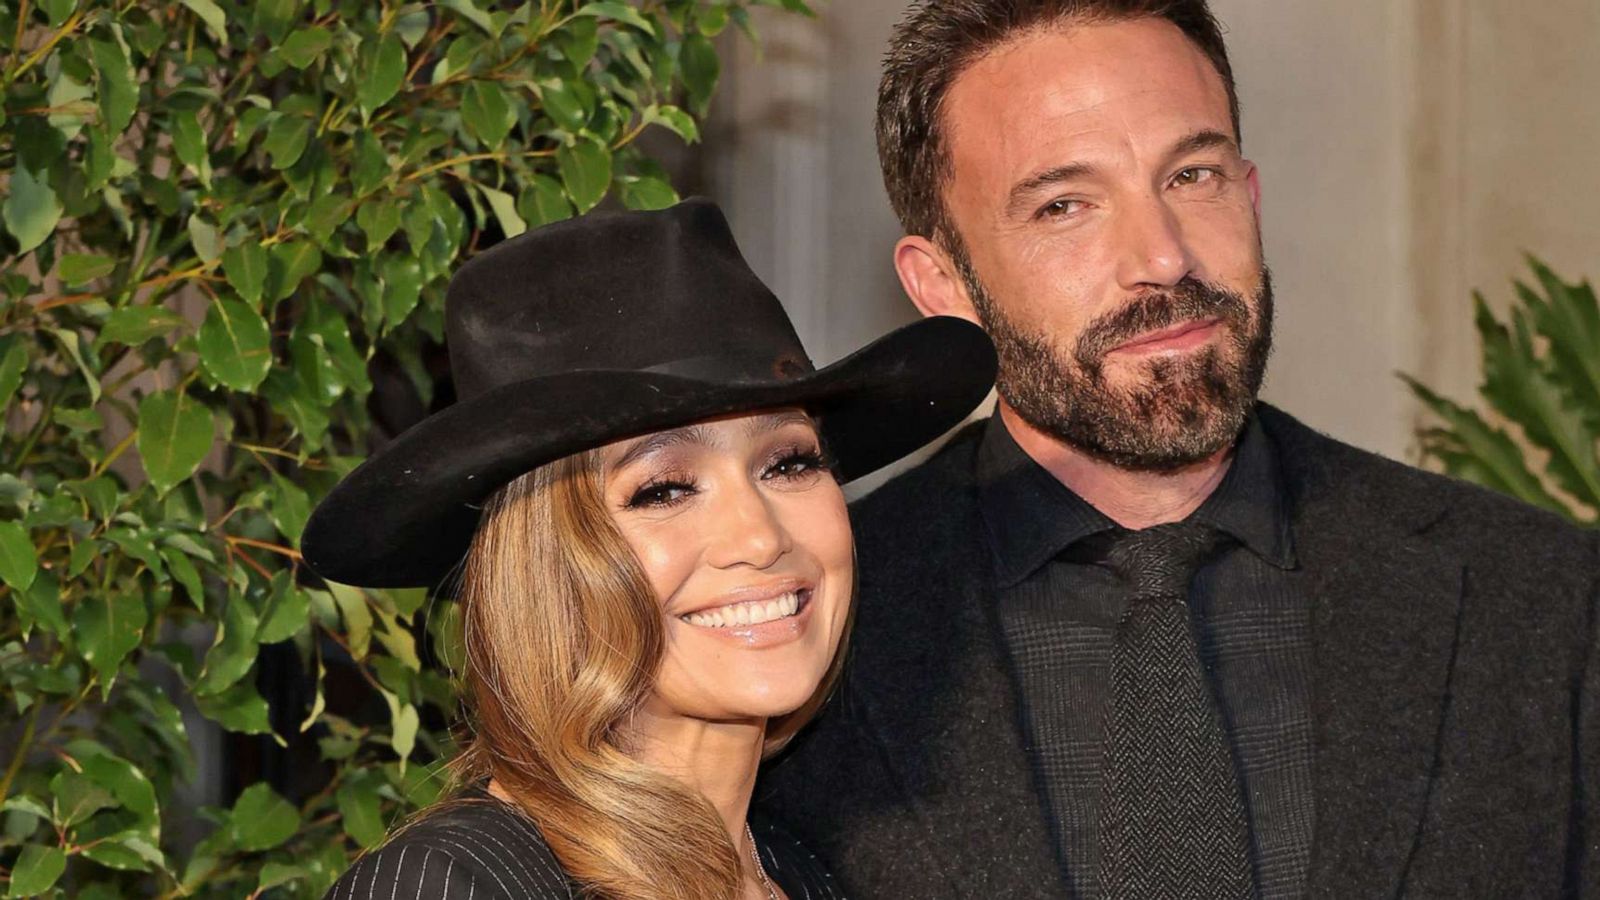 Jennifer Lopez and Ben Affleck have date night at Ralph Lauren's  star-studded West Coast show - Good Morning America